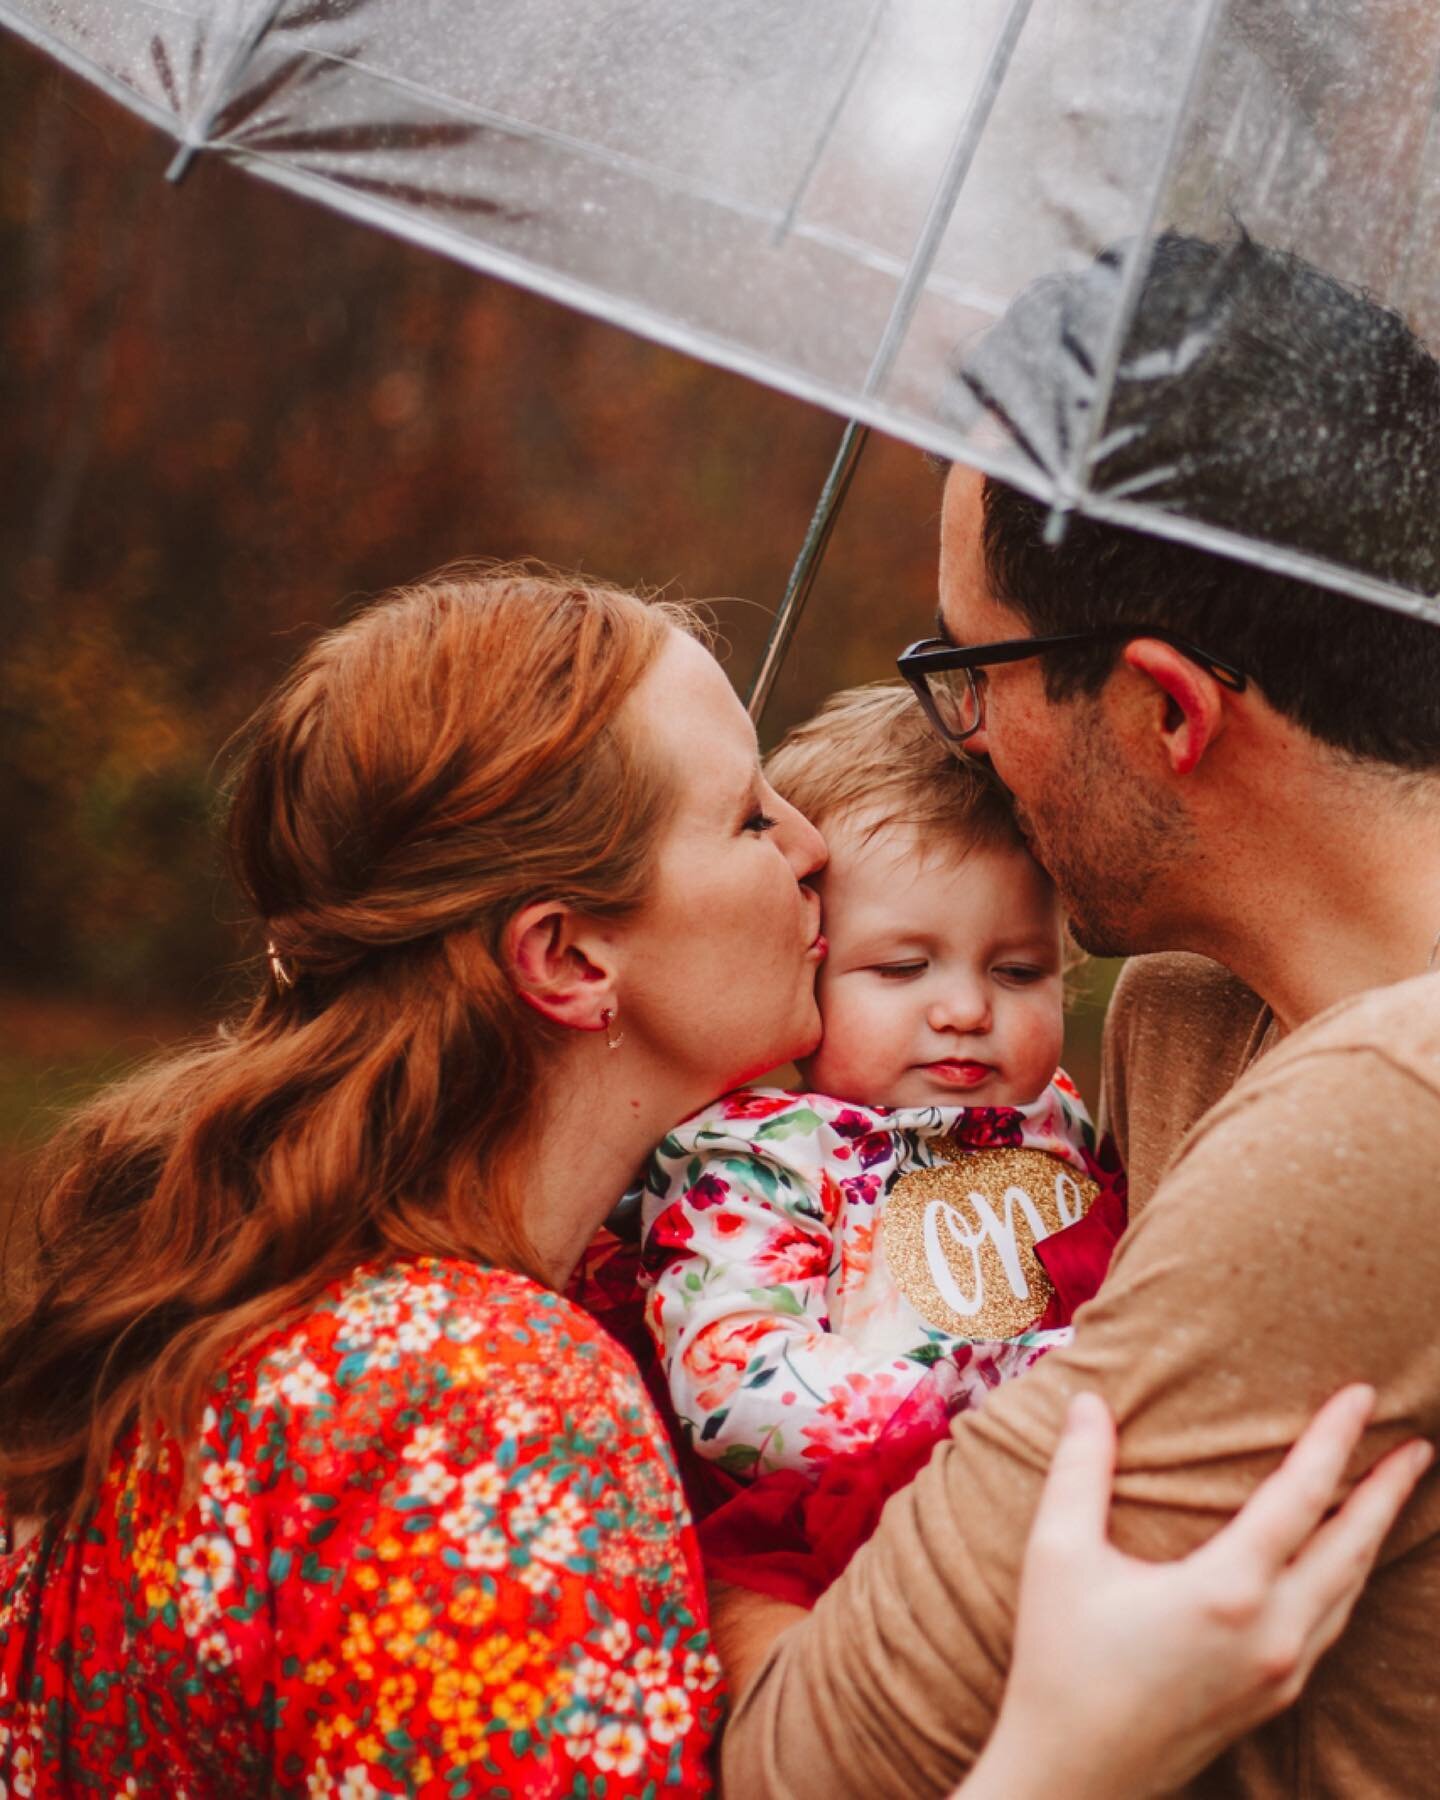 Who doesn&rsquo;t want to go play in the rain?! ☔️ Did you know it actually makes colors pop more, especially in the Fall? 🤗
.
Thanks to this awesome family for having so much fun in the rain!
#minisessions #familyphotography #familyphotographer #fa